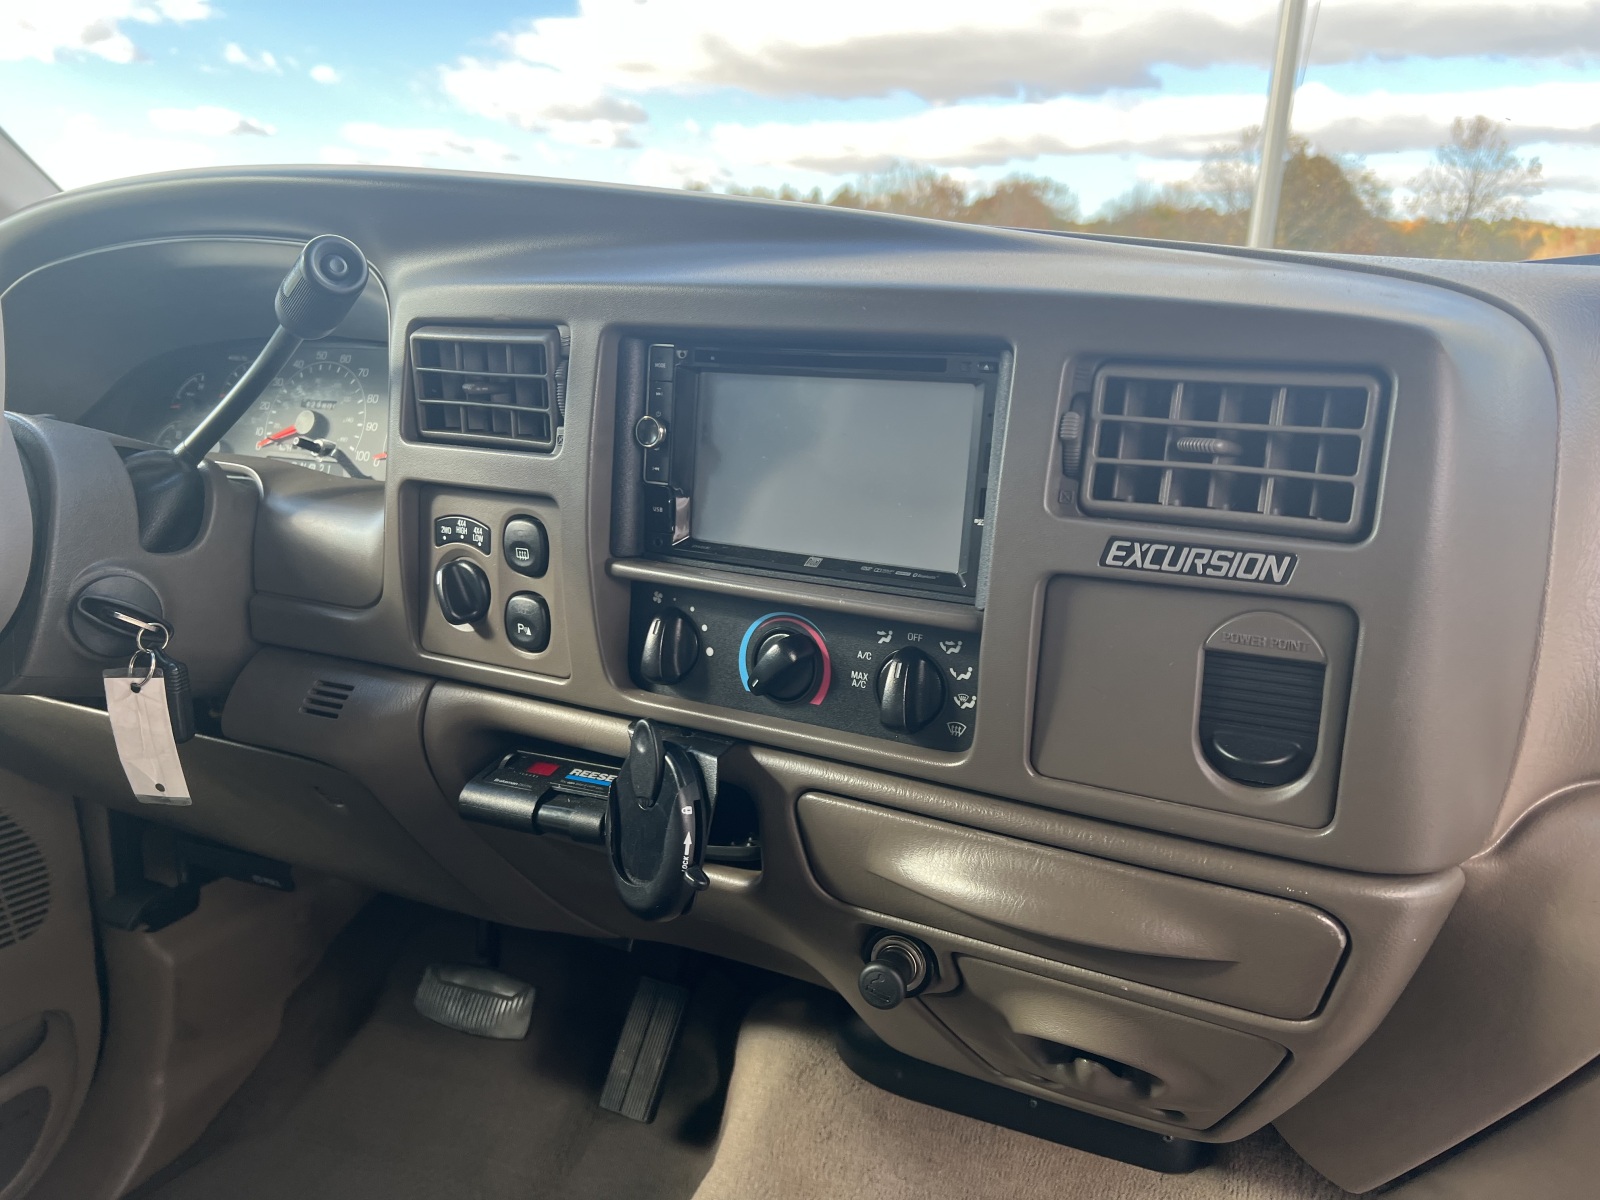 For Sale: 2001 Ford Excursion 4x4 7.3L 128,800miles - photo55